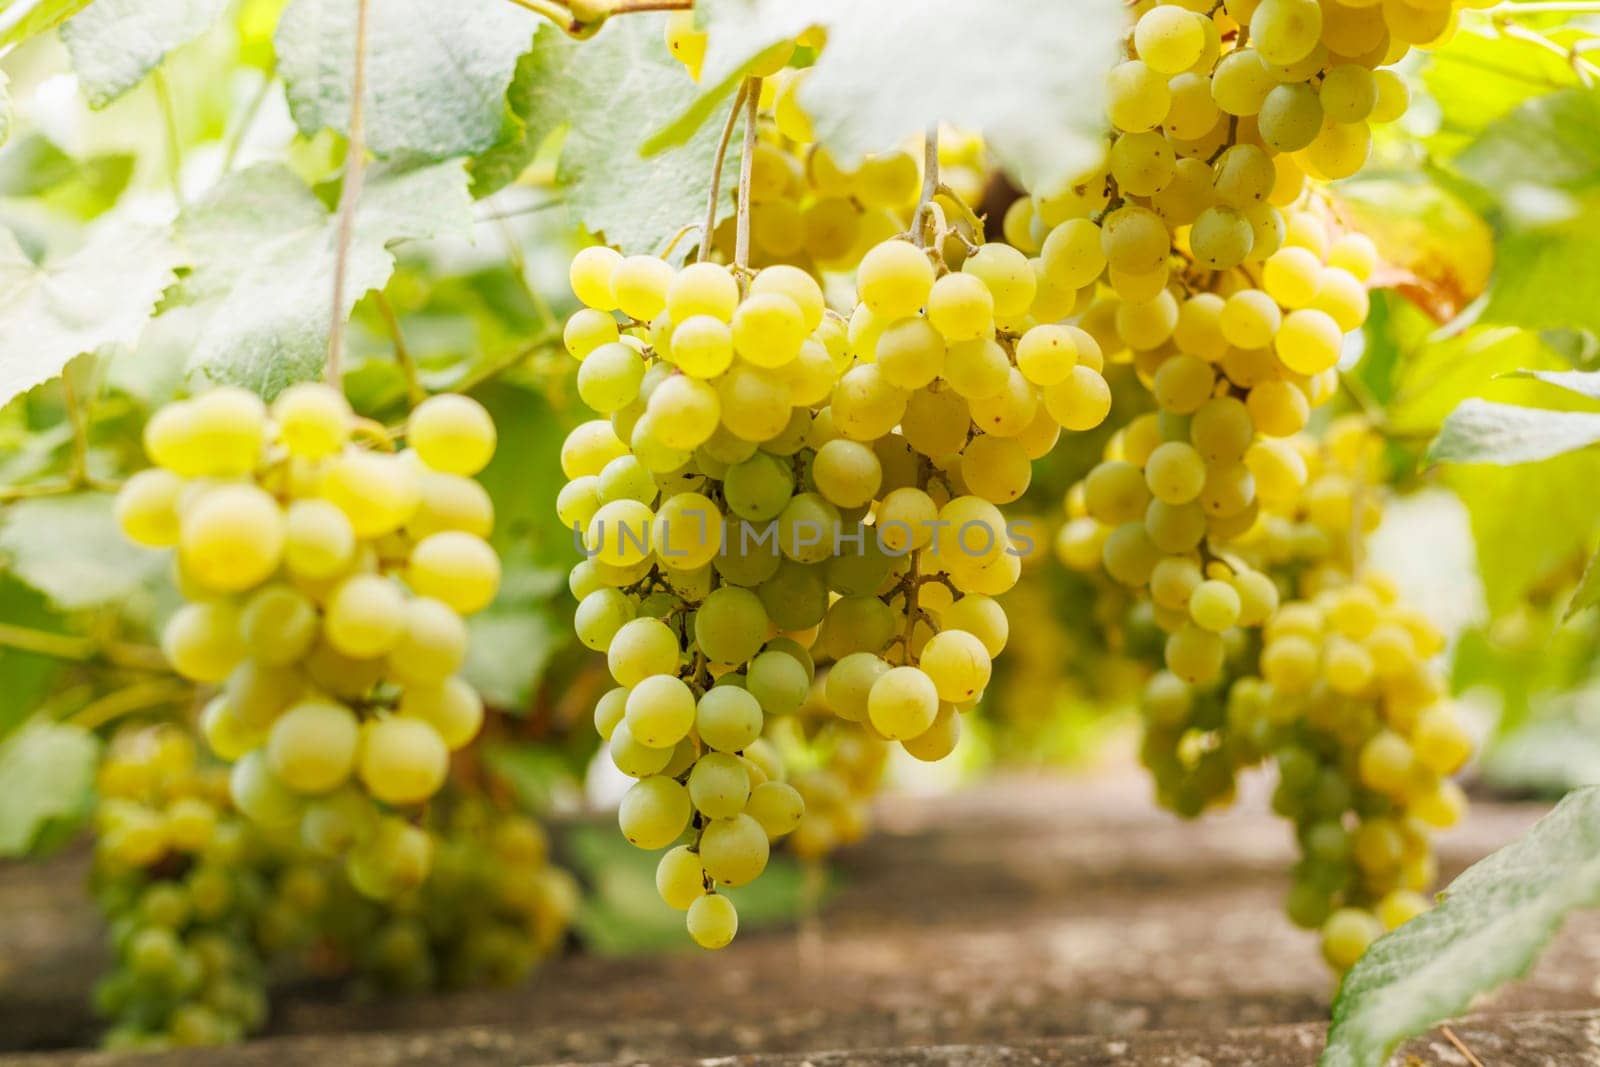 Close-up of golden grapes hanging on vine with leaves. Sunlit vineyard harvest concept for design and print. Macro shot with natural background.